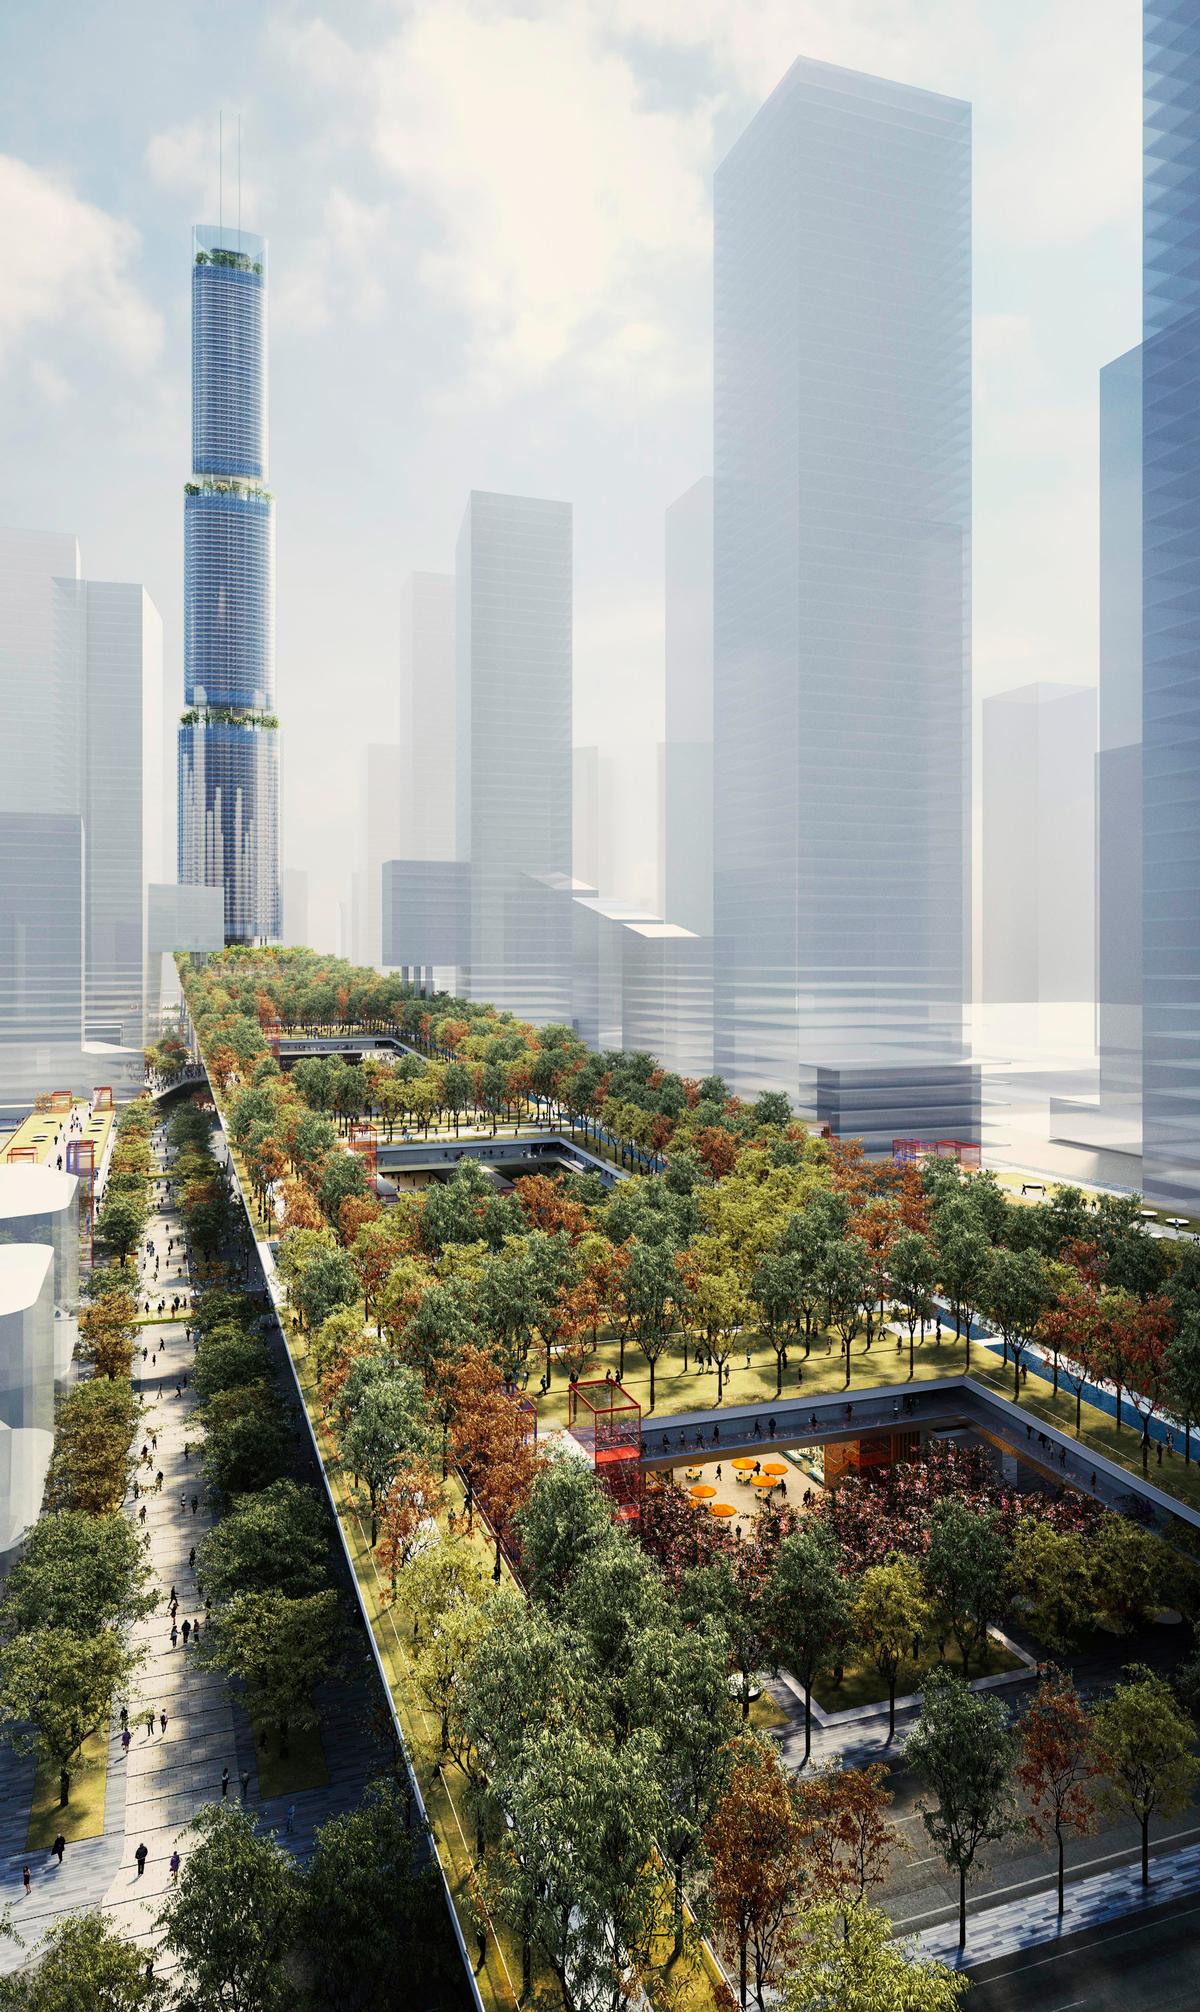 The garden will link the city to the Qianhai Bay. / Courtesy of Rogers Stirk Harbour + Partners